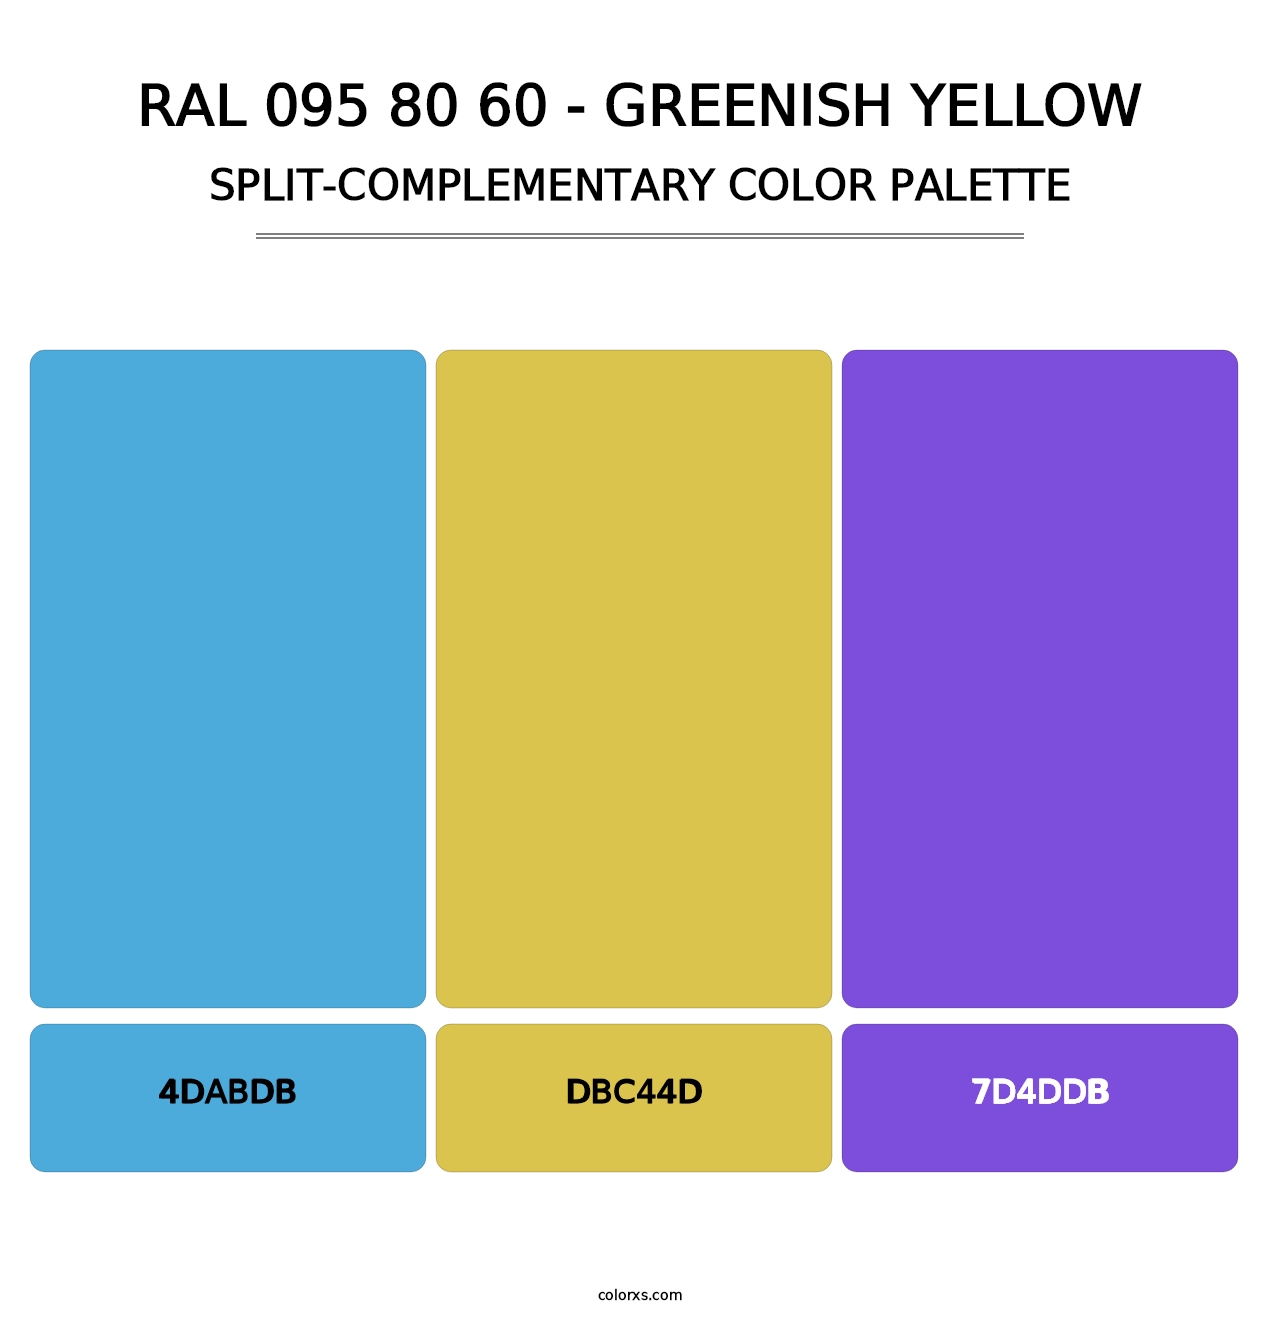 RAL 095 80 60 - Greenish Yellow - Split-Complementary Color Palette